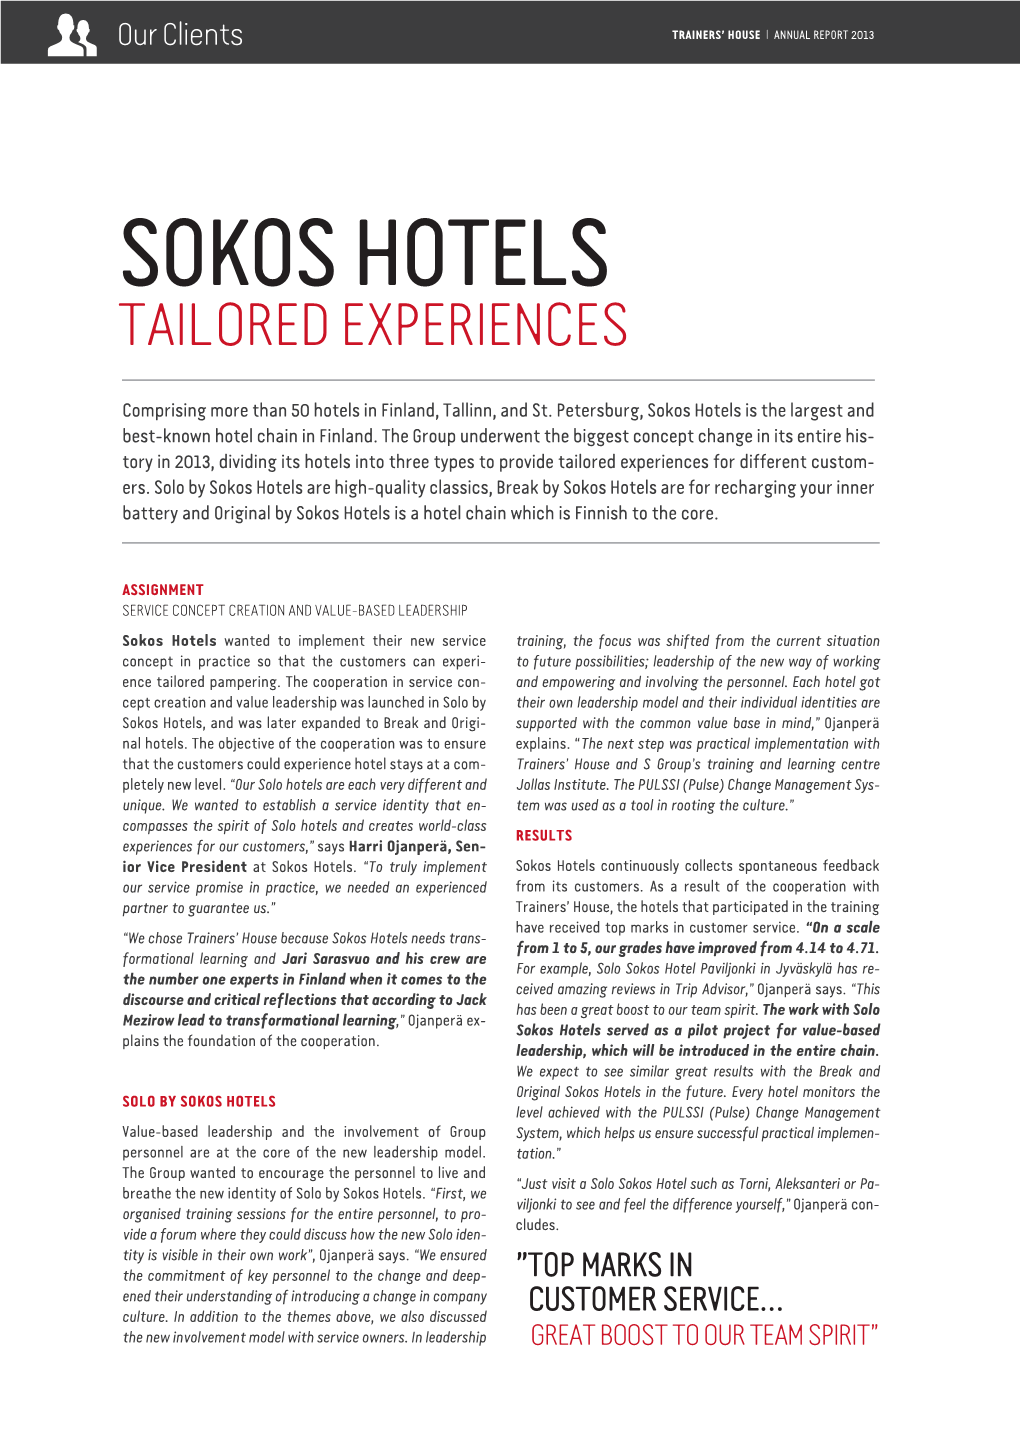 Sokos Hotels Tailored Experiences